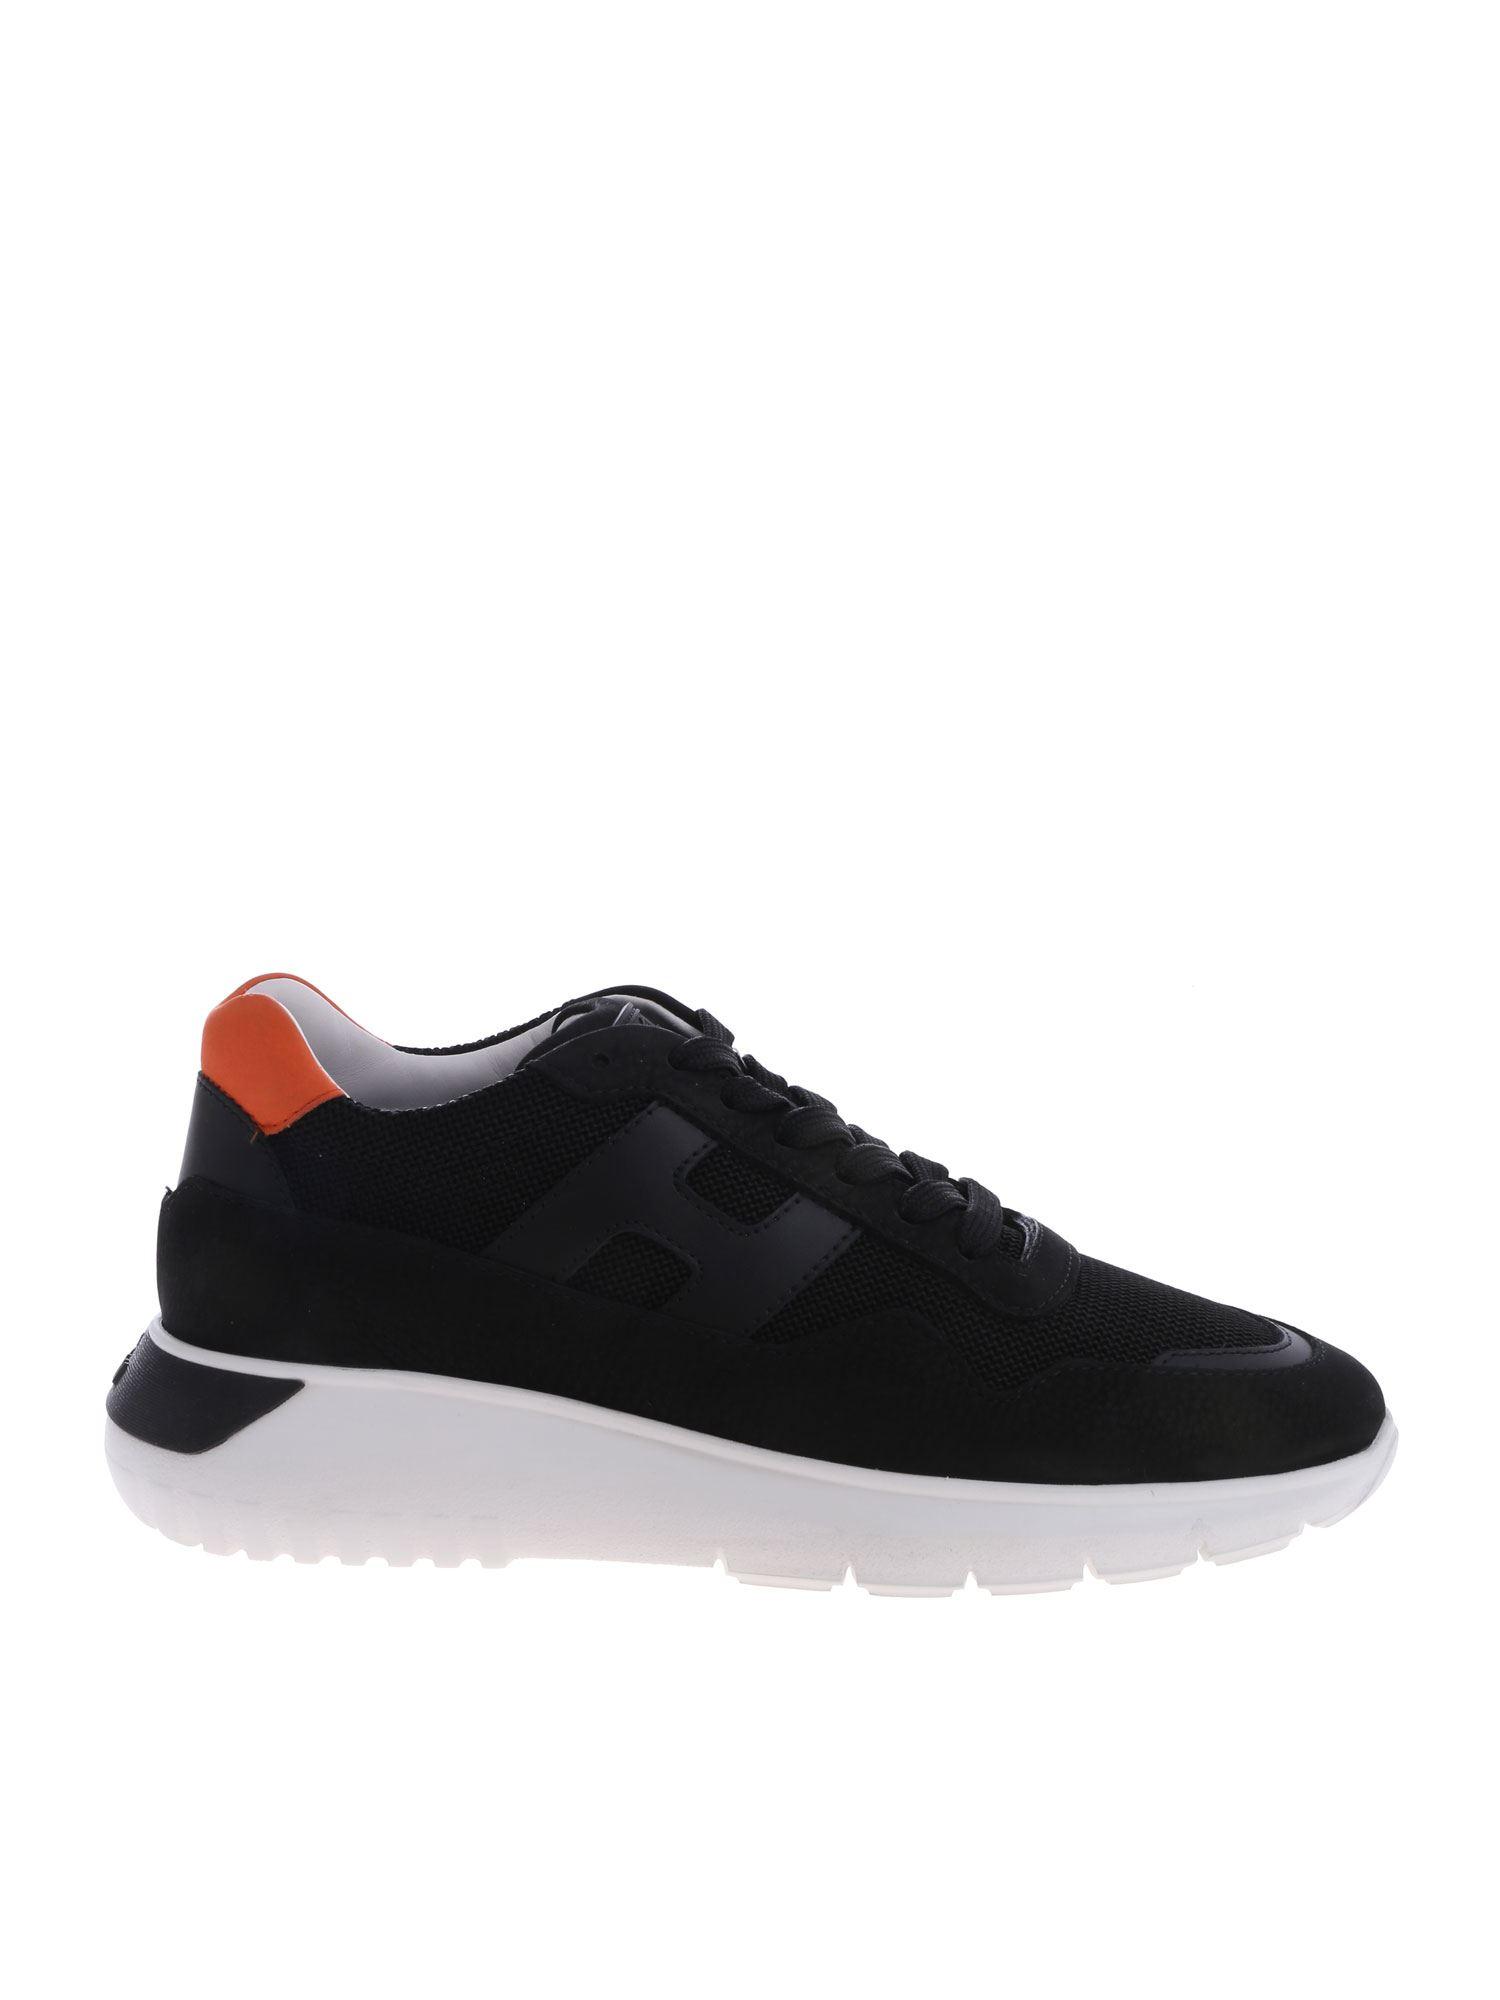 Hogan Leather Black Interactive 3 Sneakers for Men - Save 24% - Lyst